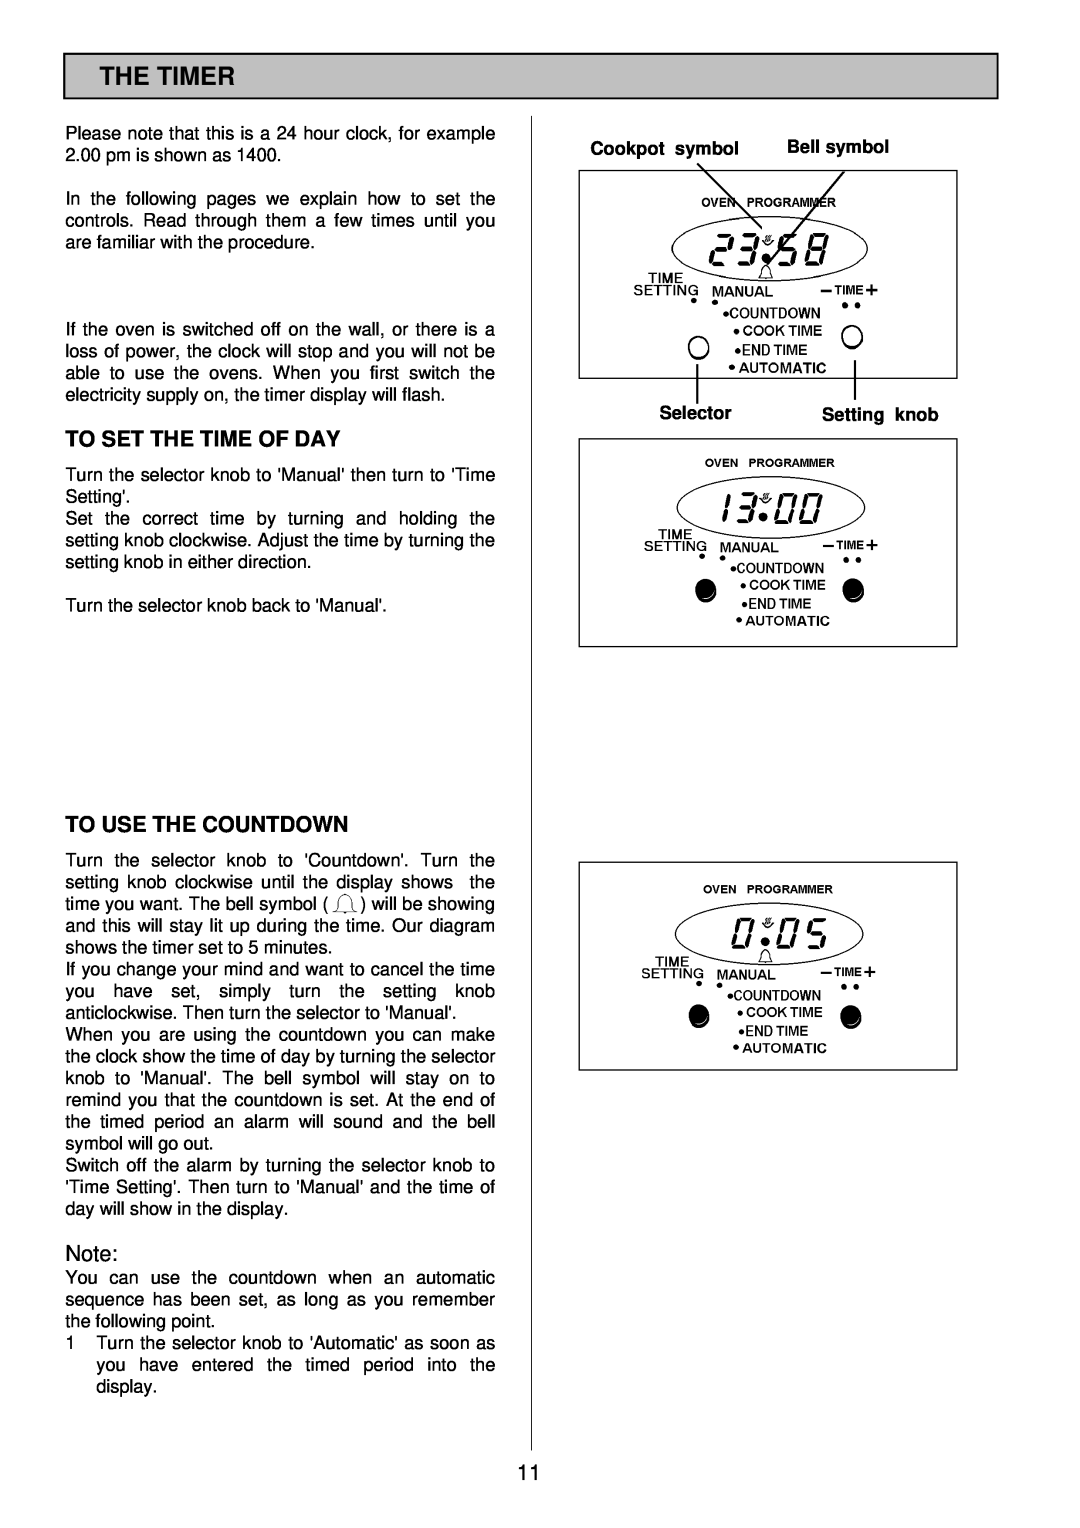 Tricity Bendix SI 453 installation instructions The Timer, To Set The Time Of Day, To Use The Countdown 